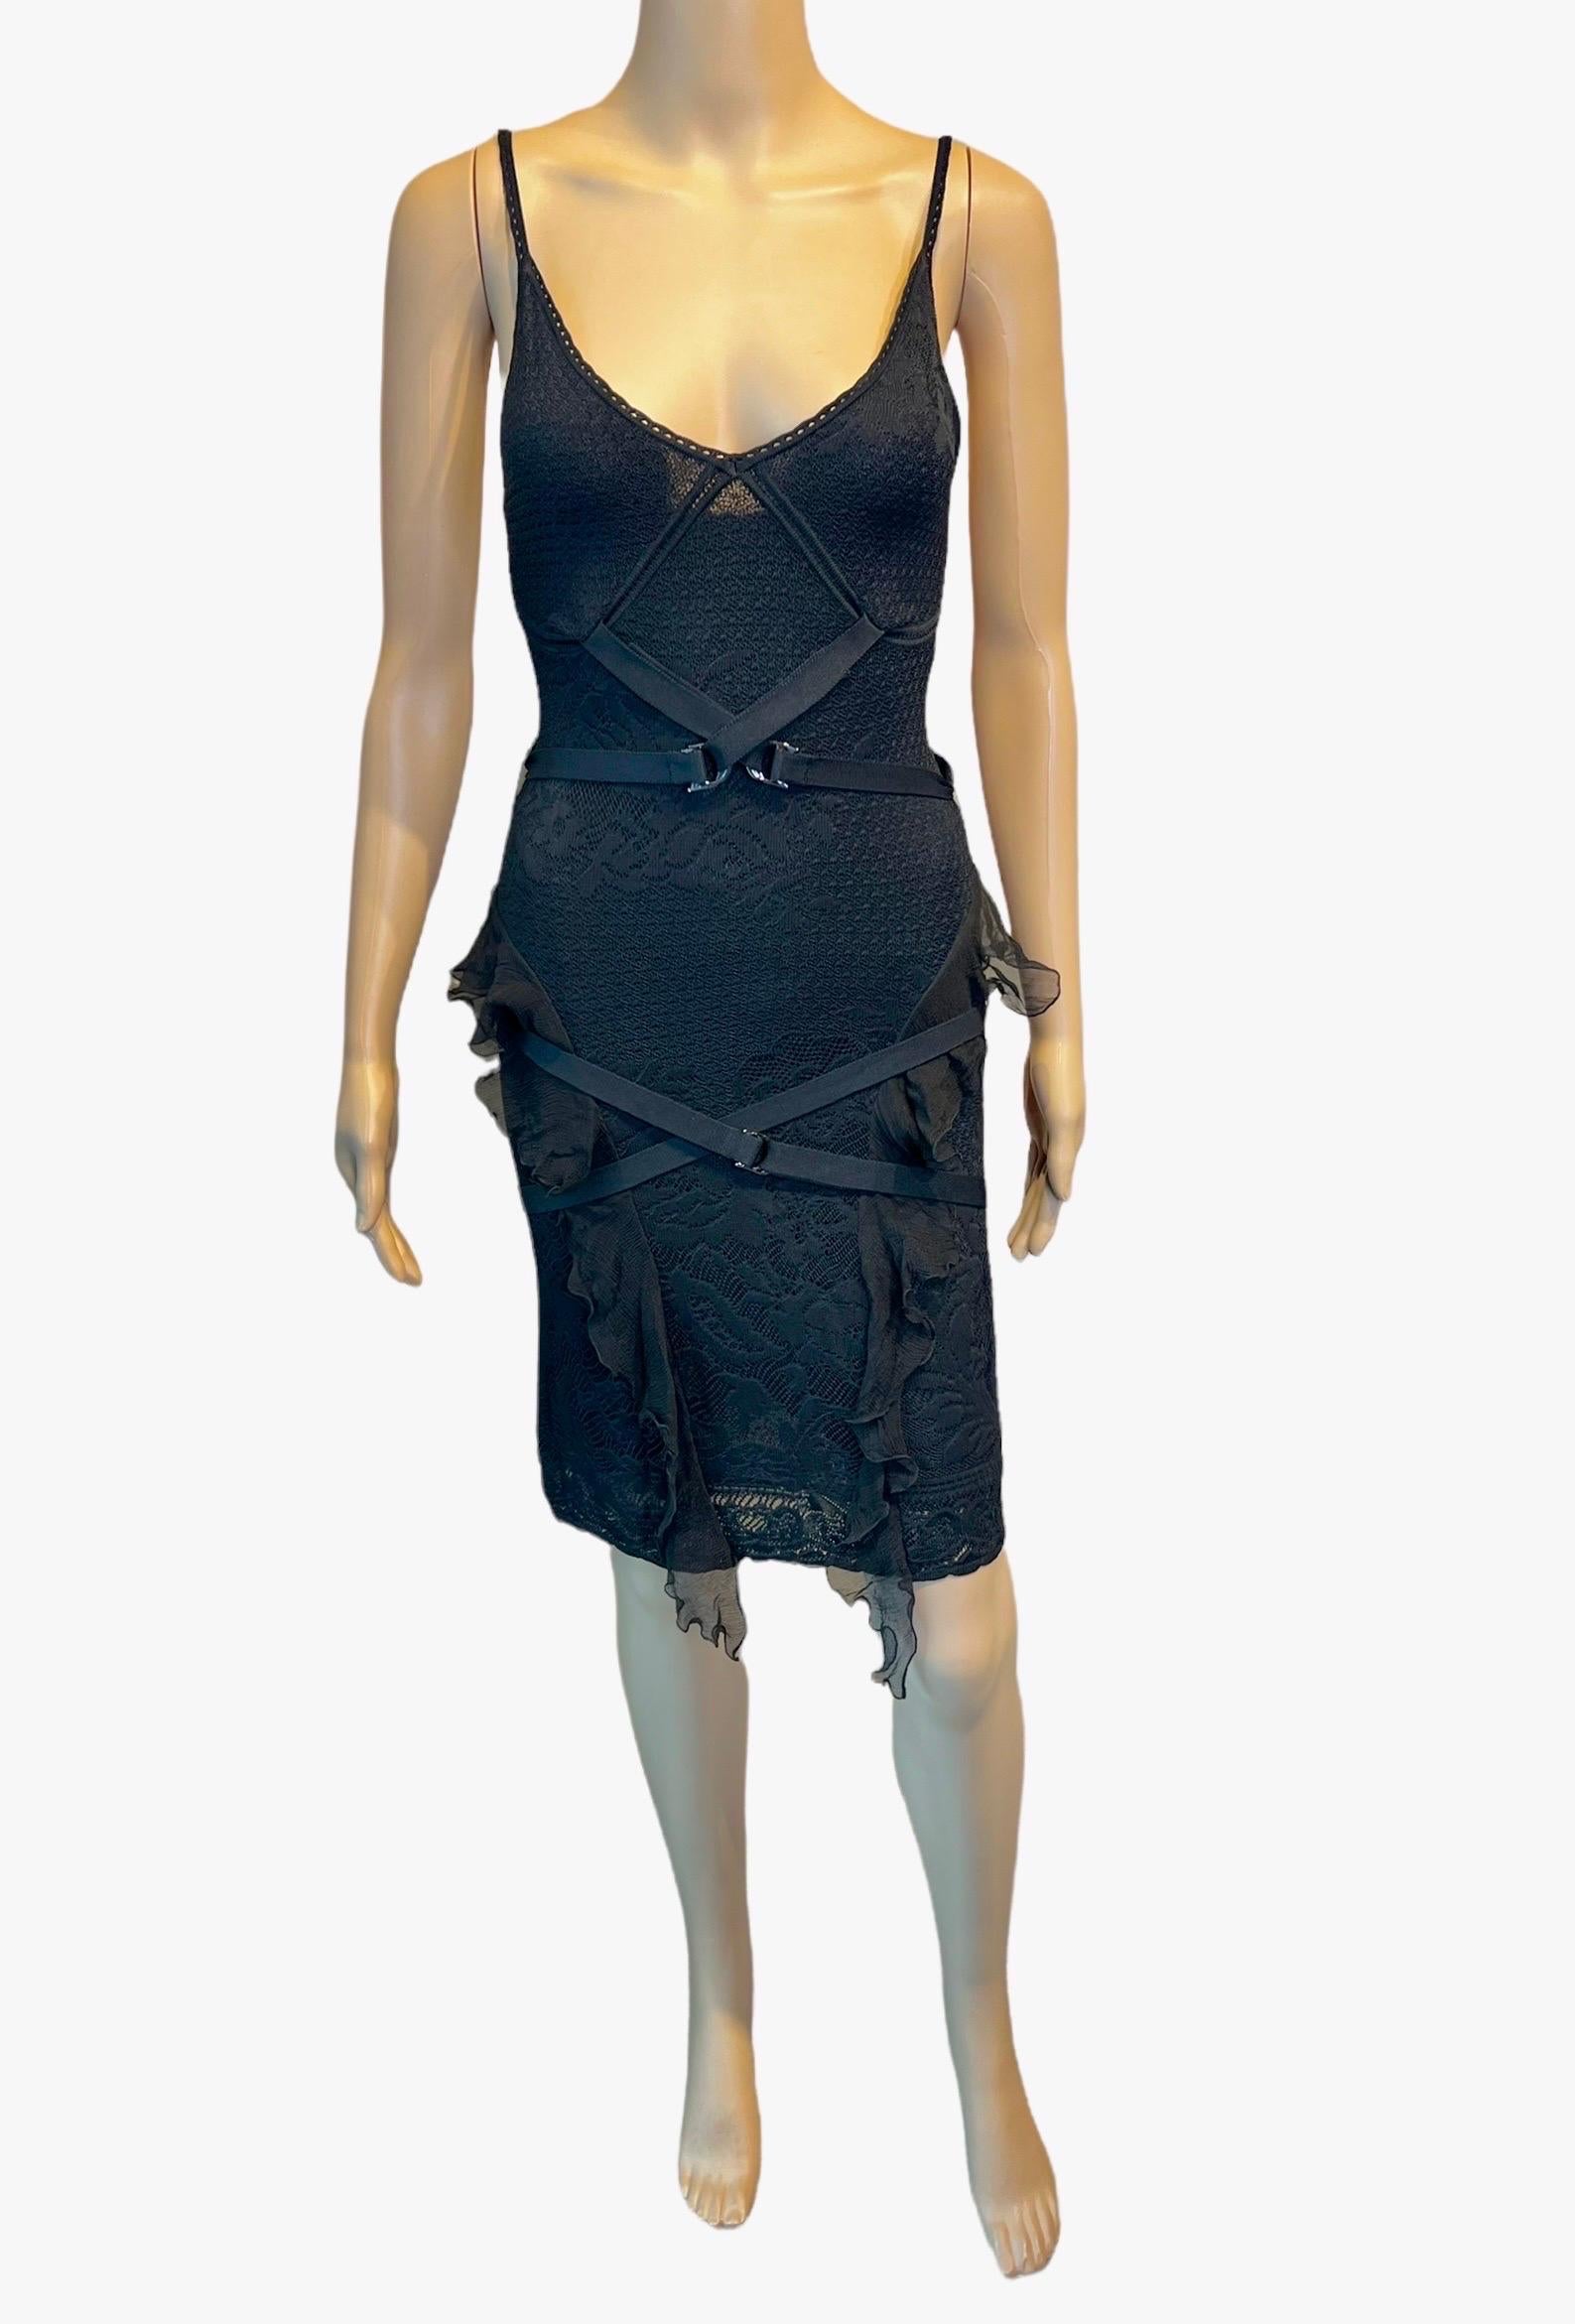 Christian Dior by John Galliano S/S 2003 Sheer Lace Bondage Knit Black Dress  For Sale 1